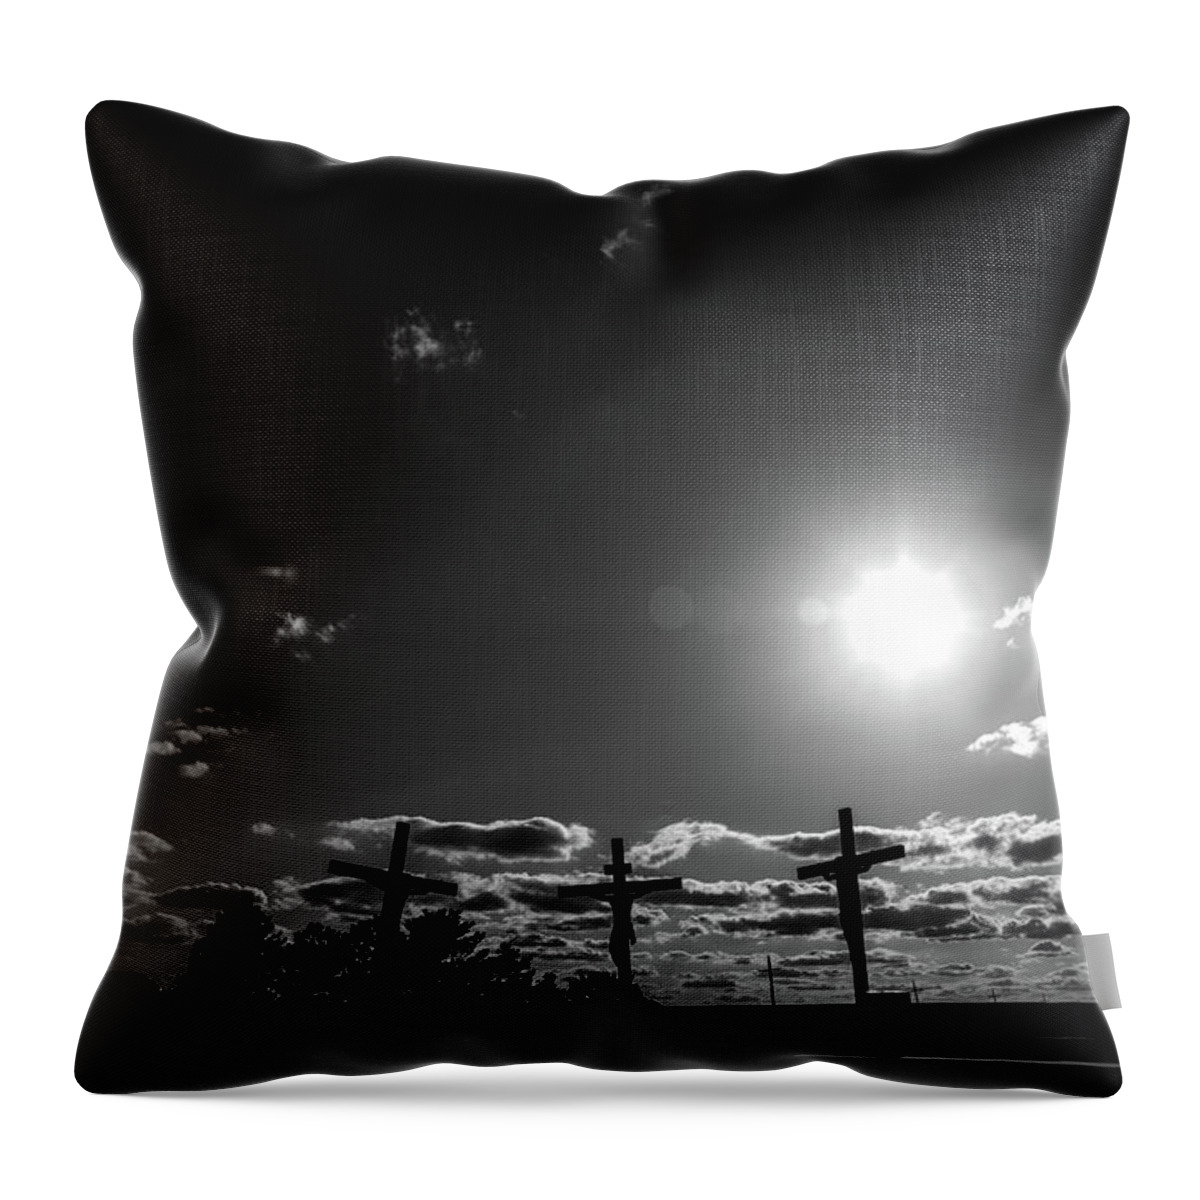 The Cross Of Our Lord Jesus Christ In Groom Texas Throw Pillow featuring the photograph The Cross of our Lord Jesus Christ in Groom Texas by Eldon McGraw